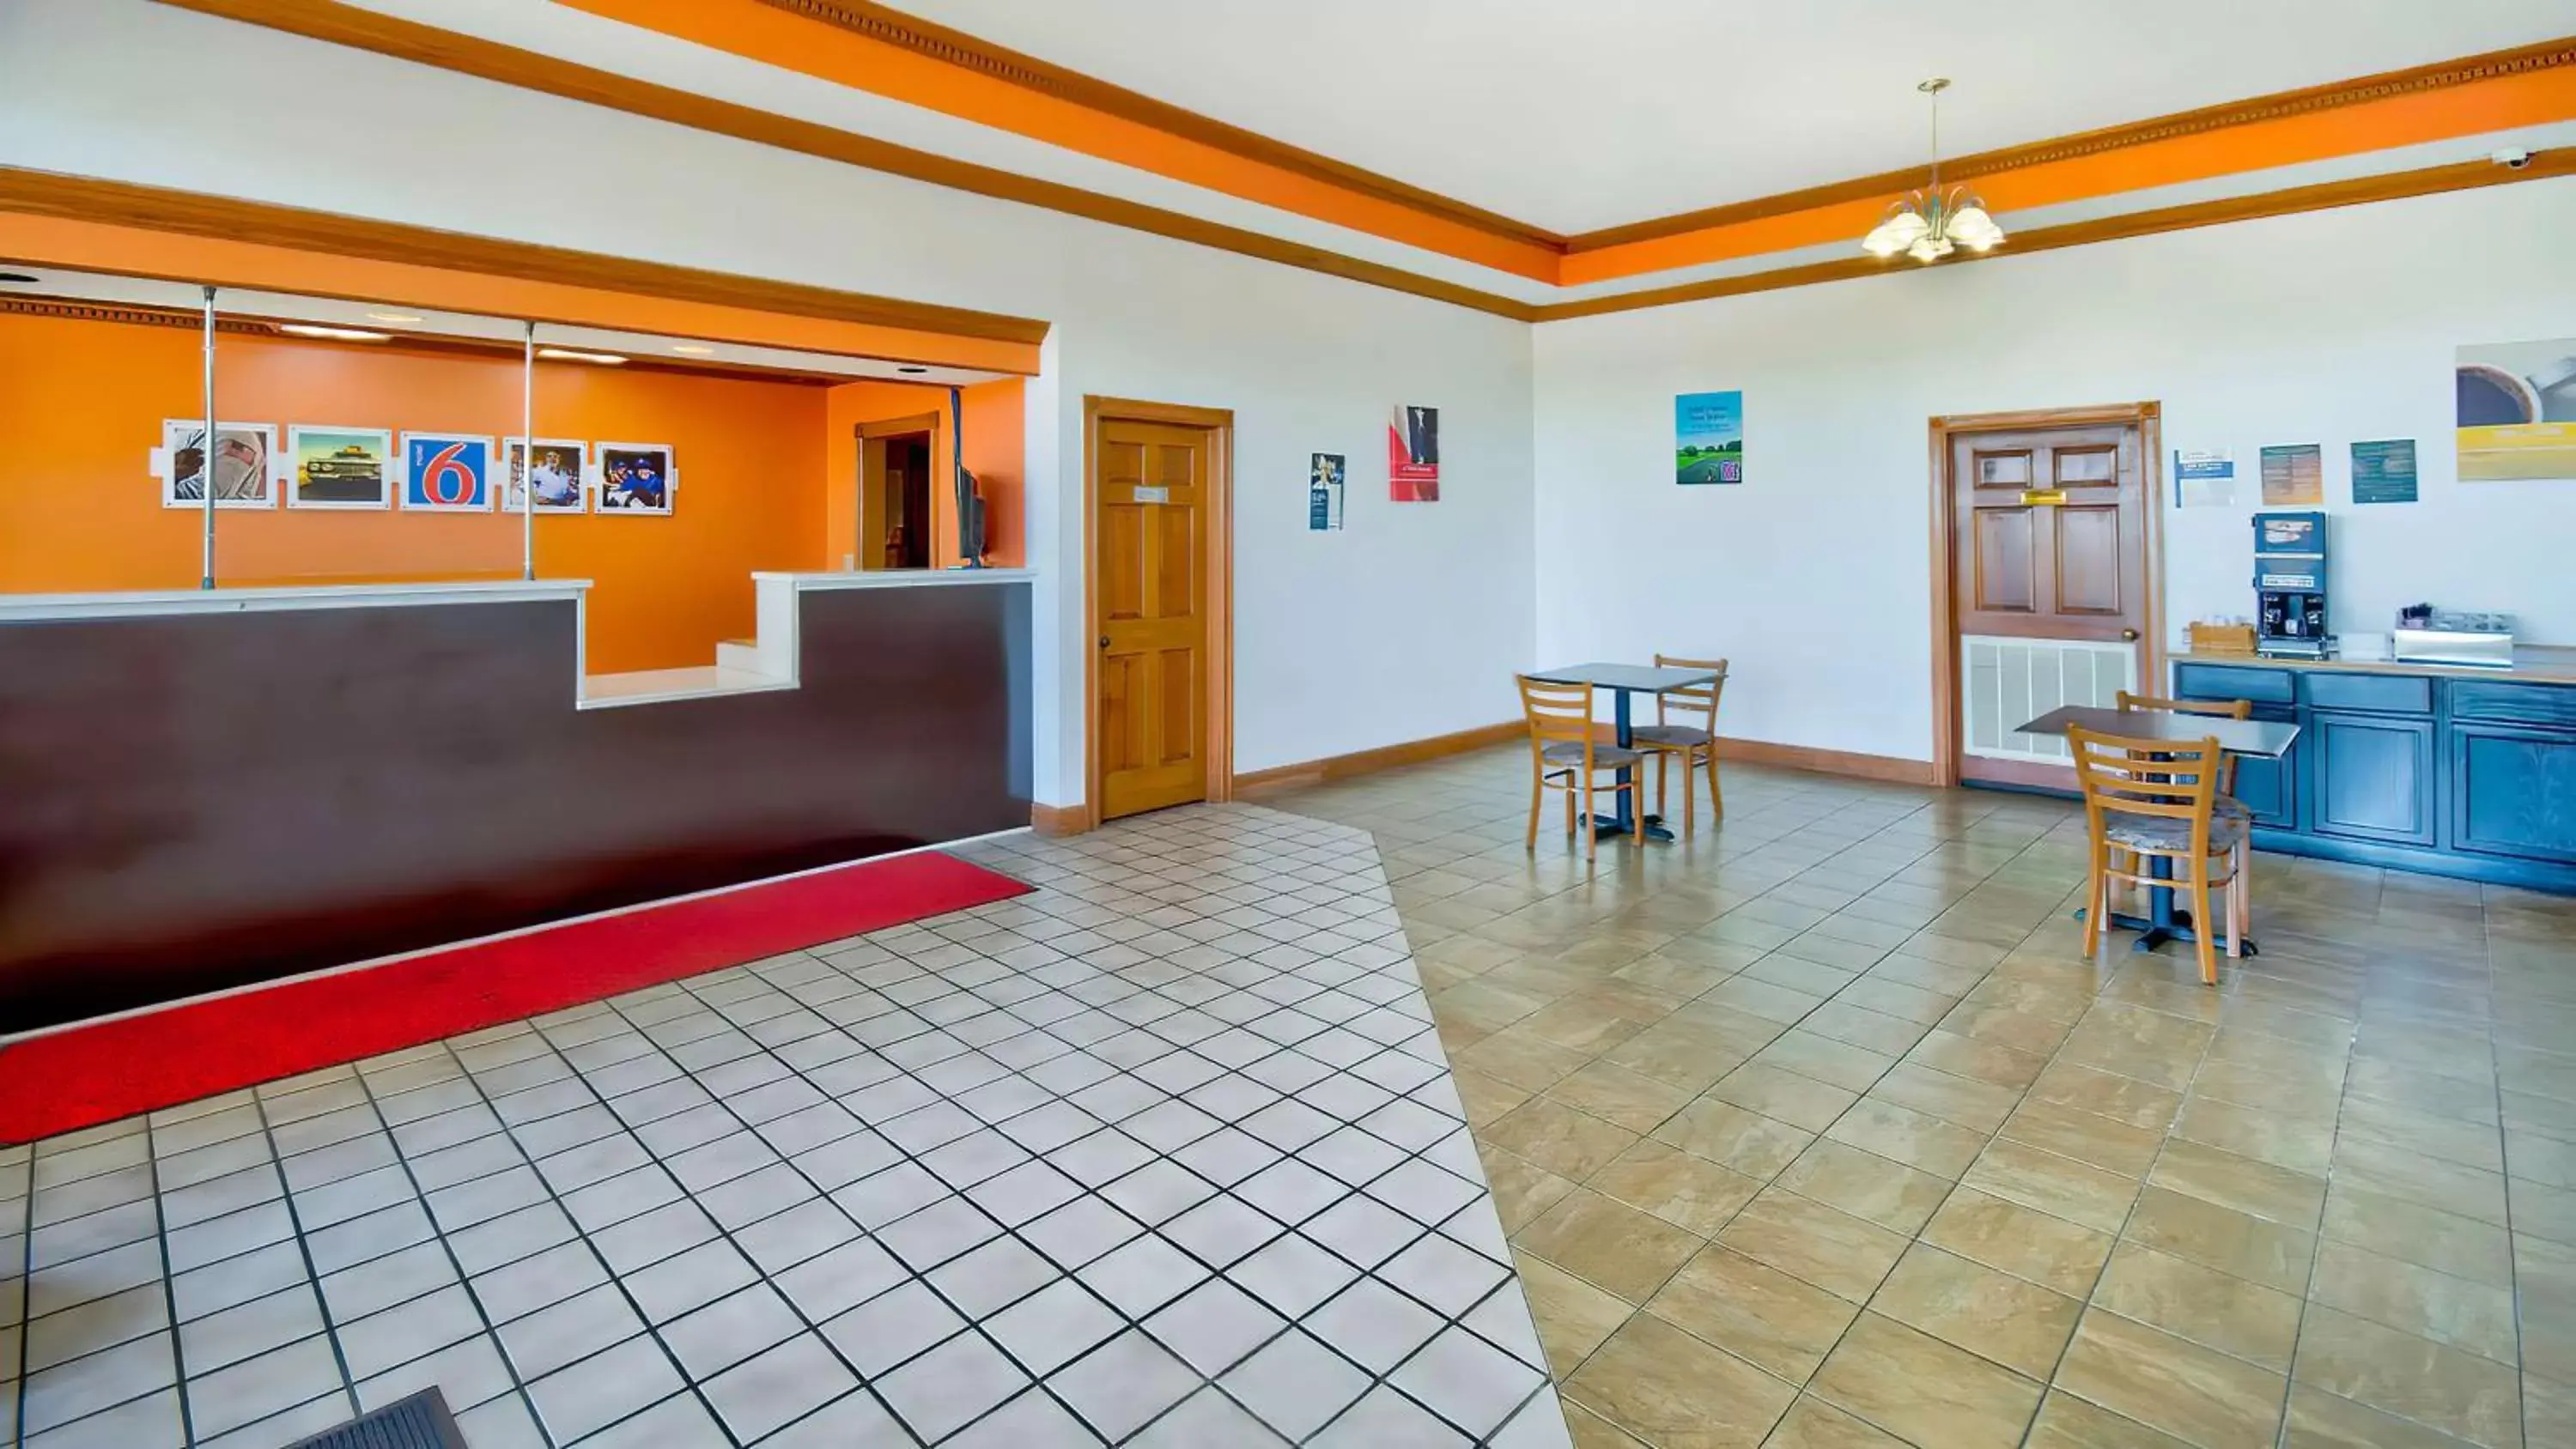 Lobby or reception in Motel 6-Grand Rivers, KY